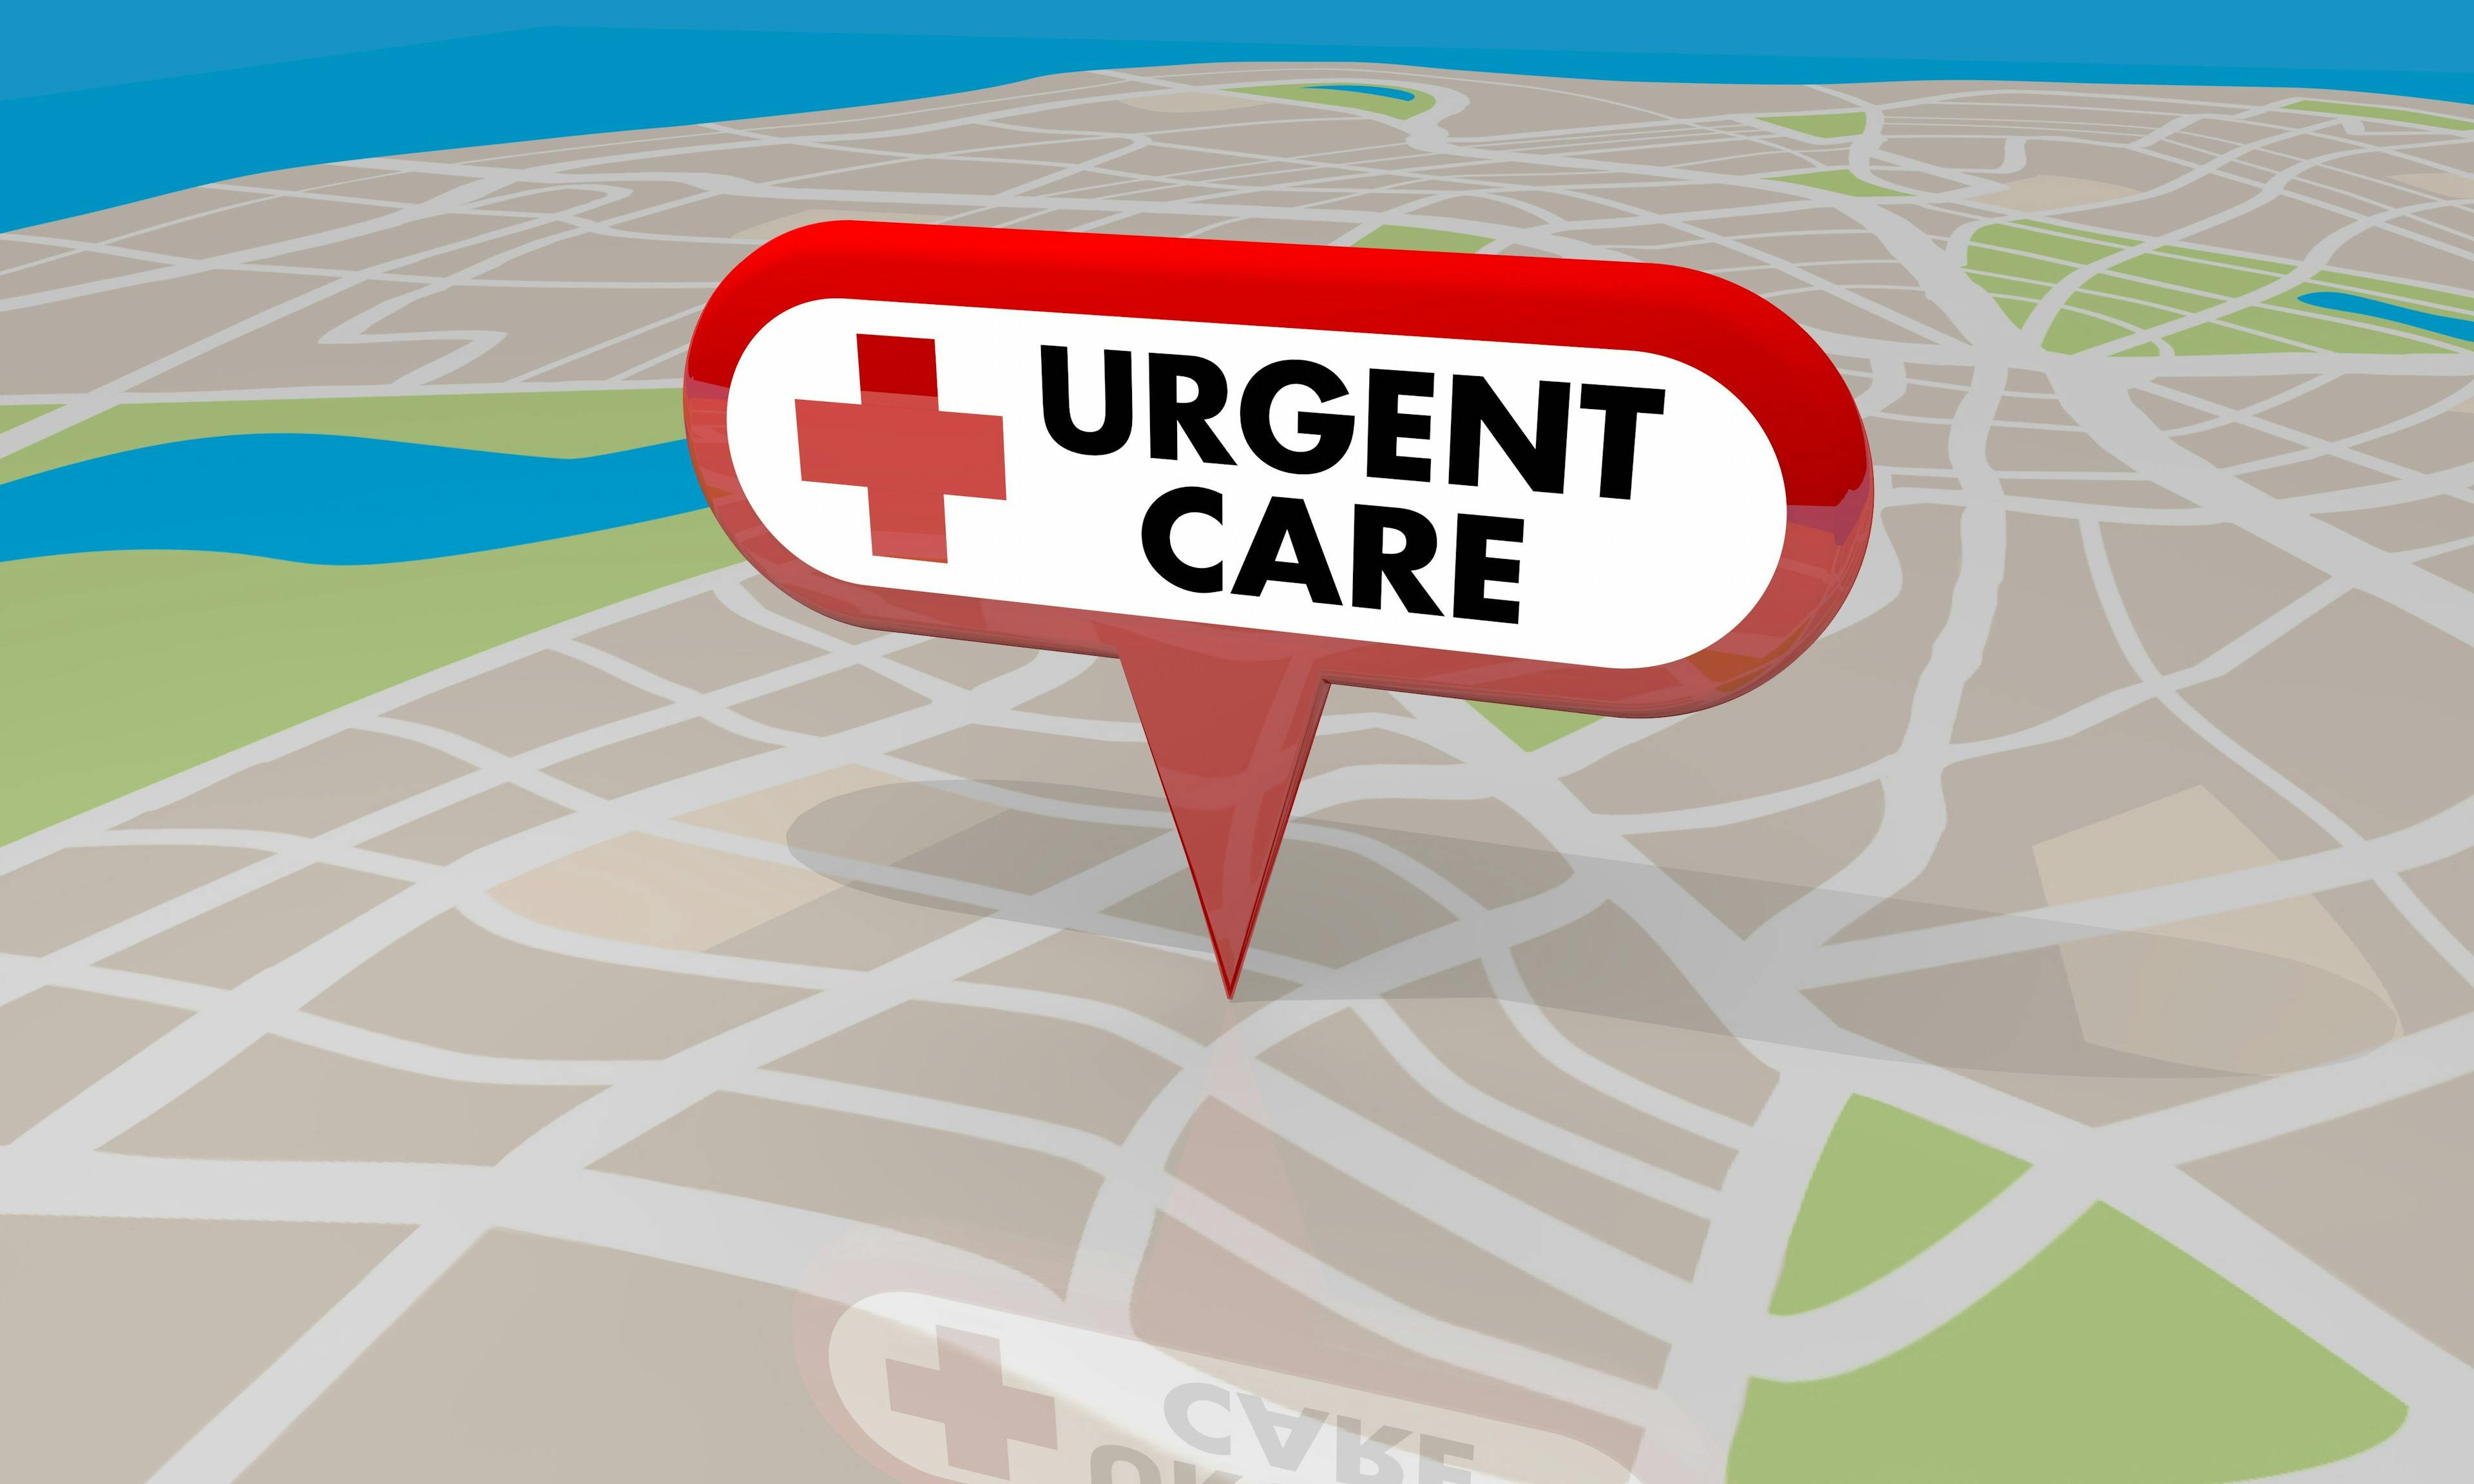 Should your primary care practice expand into urgent care?